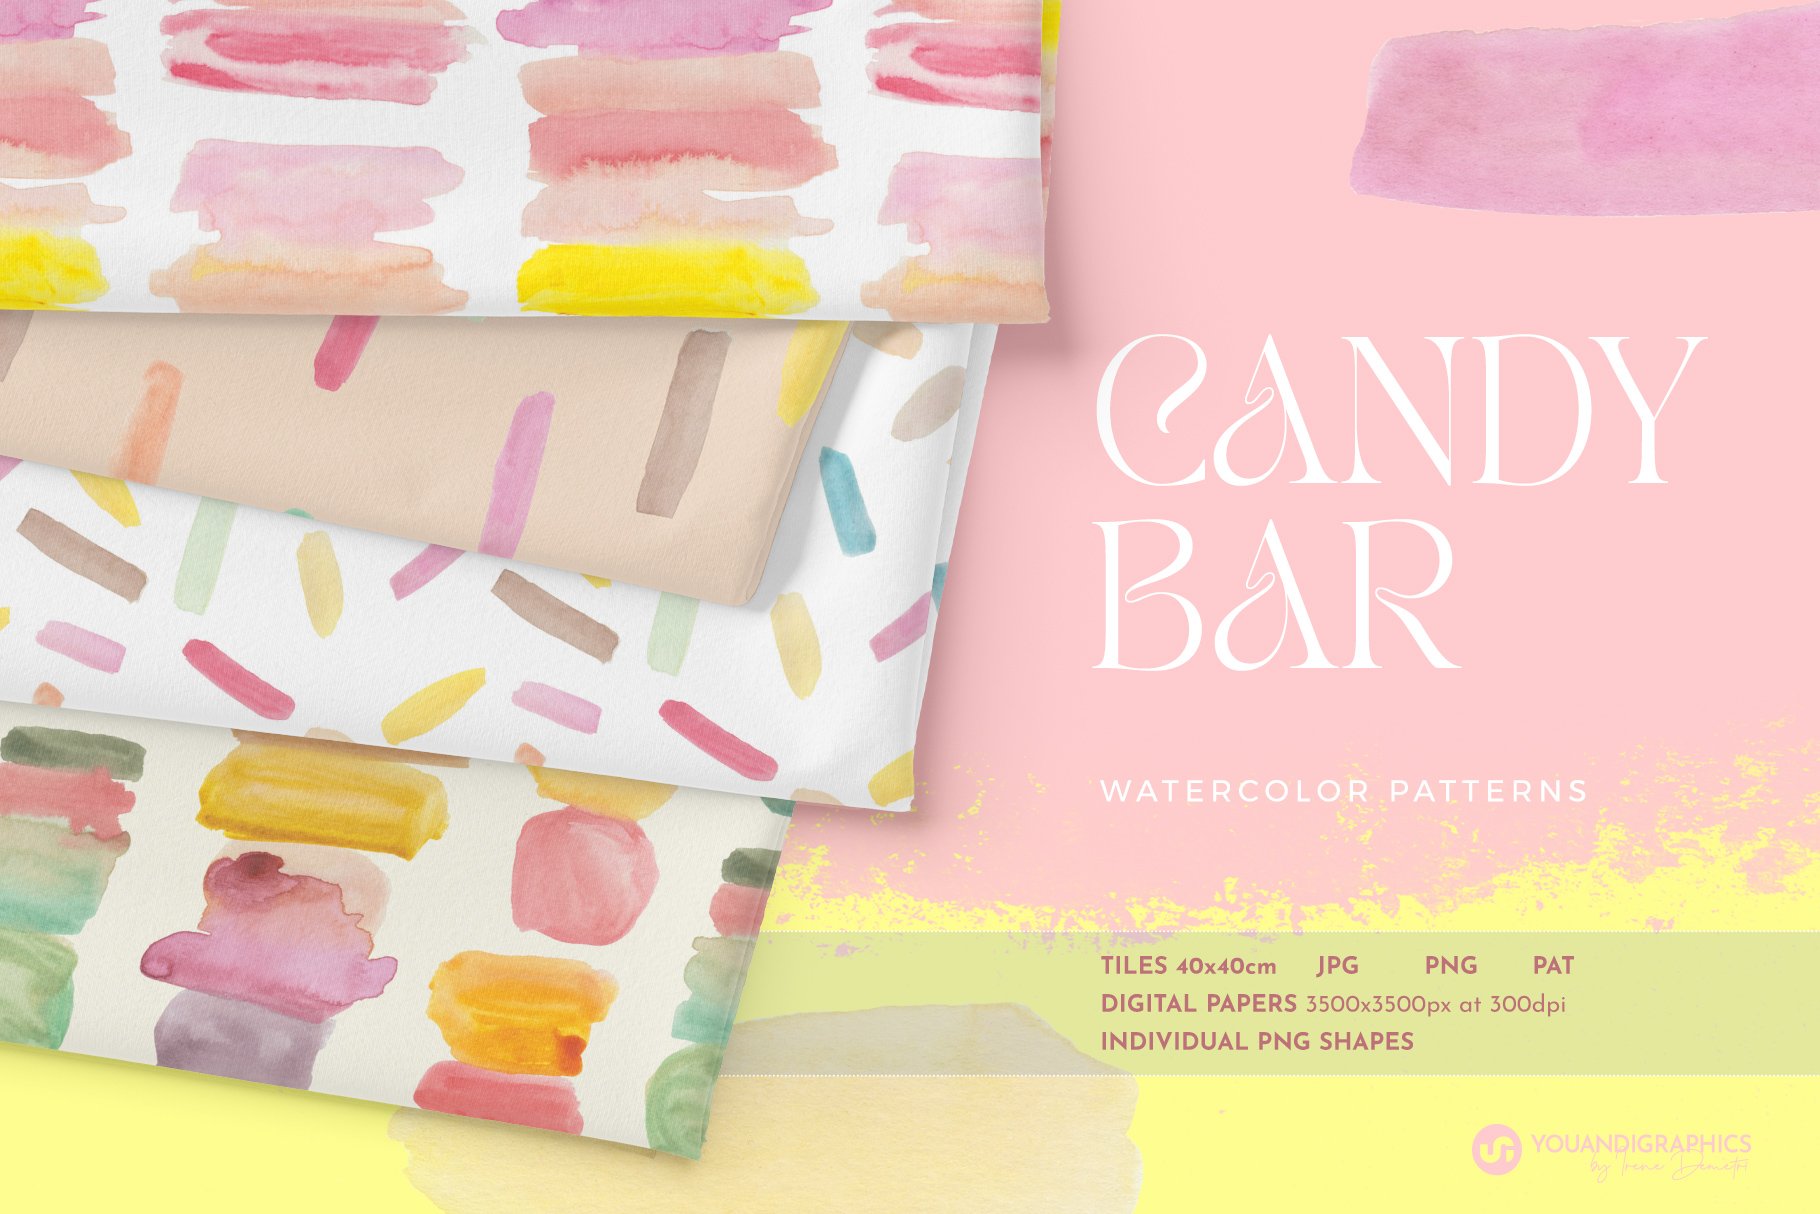 Candy Bar Watercolor Patterns cover image.